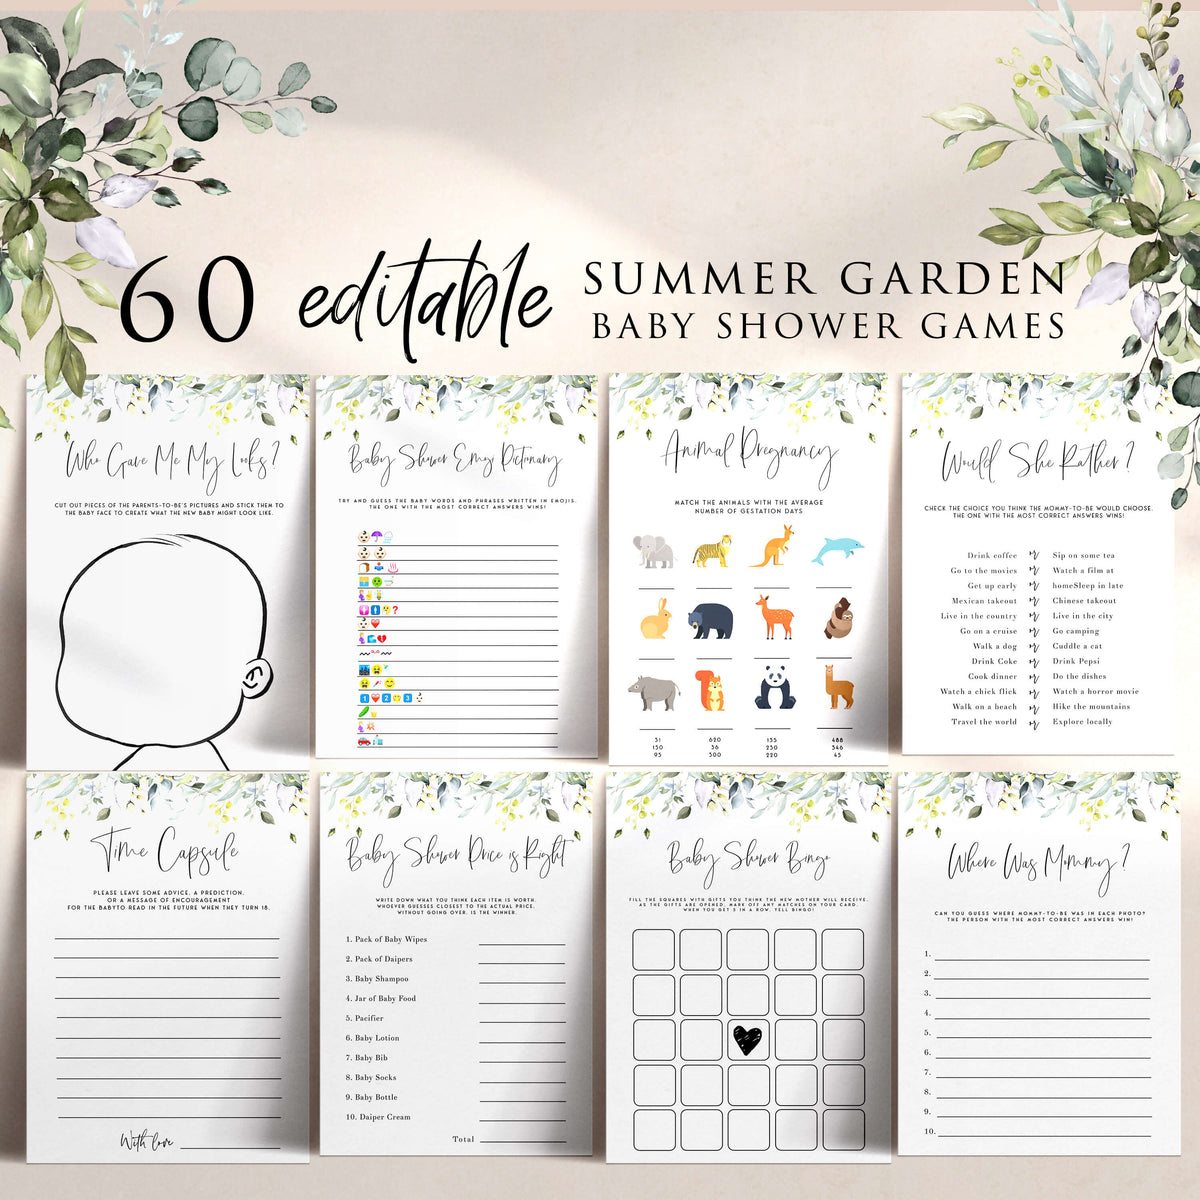 60 editable baby shower games, floral baby shower games, editable baby games, printable baby shower games, summer baby shower games